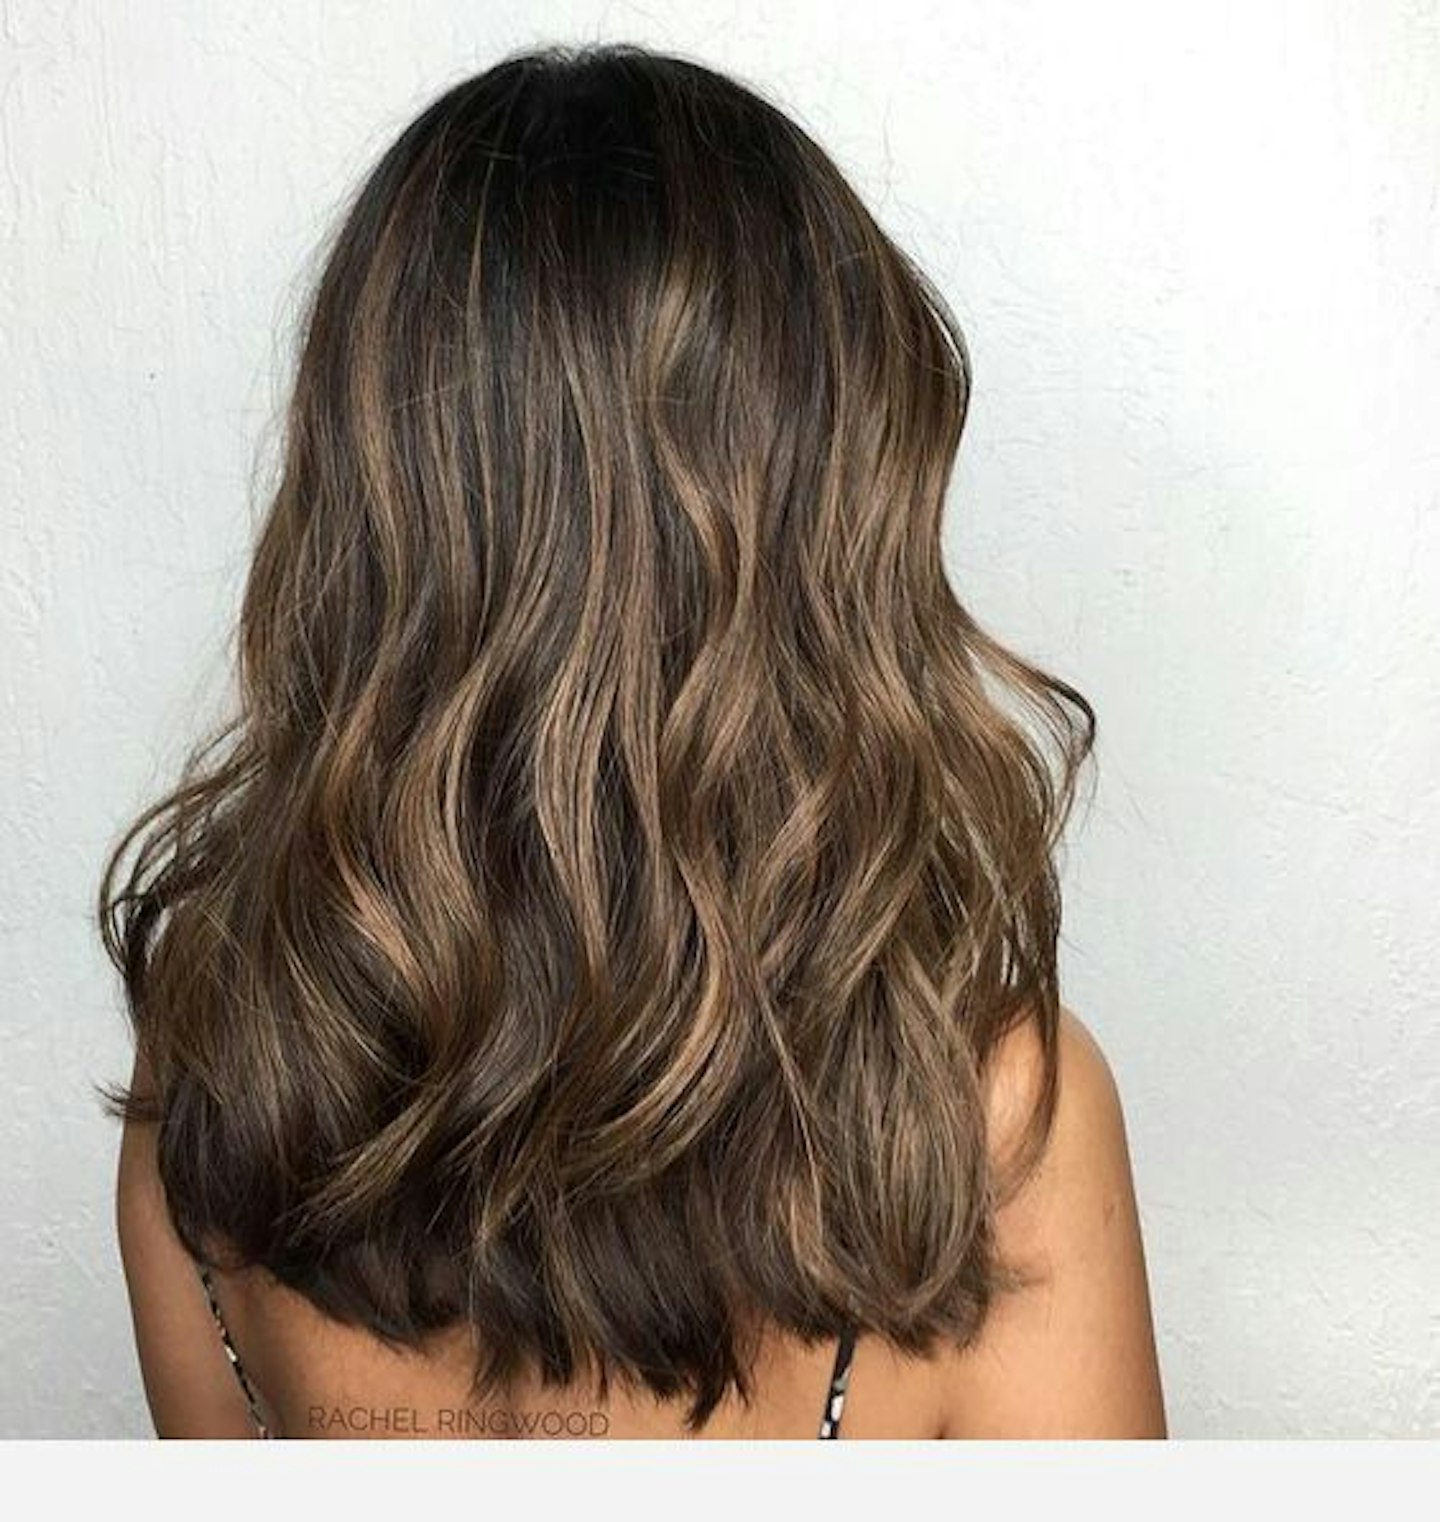 Darker toffee shades add depth and give the illusion of more thickness in dark hair.